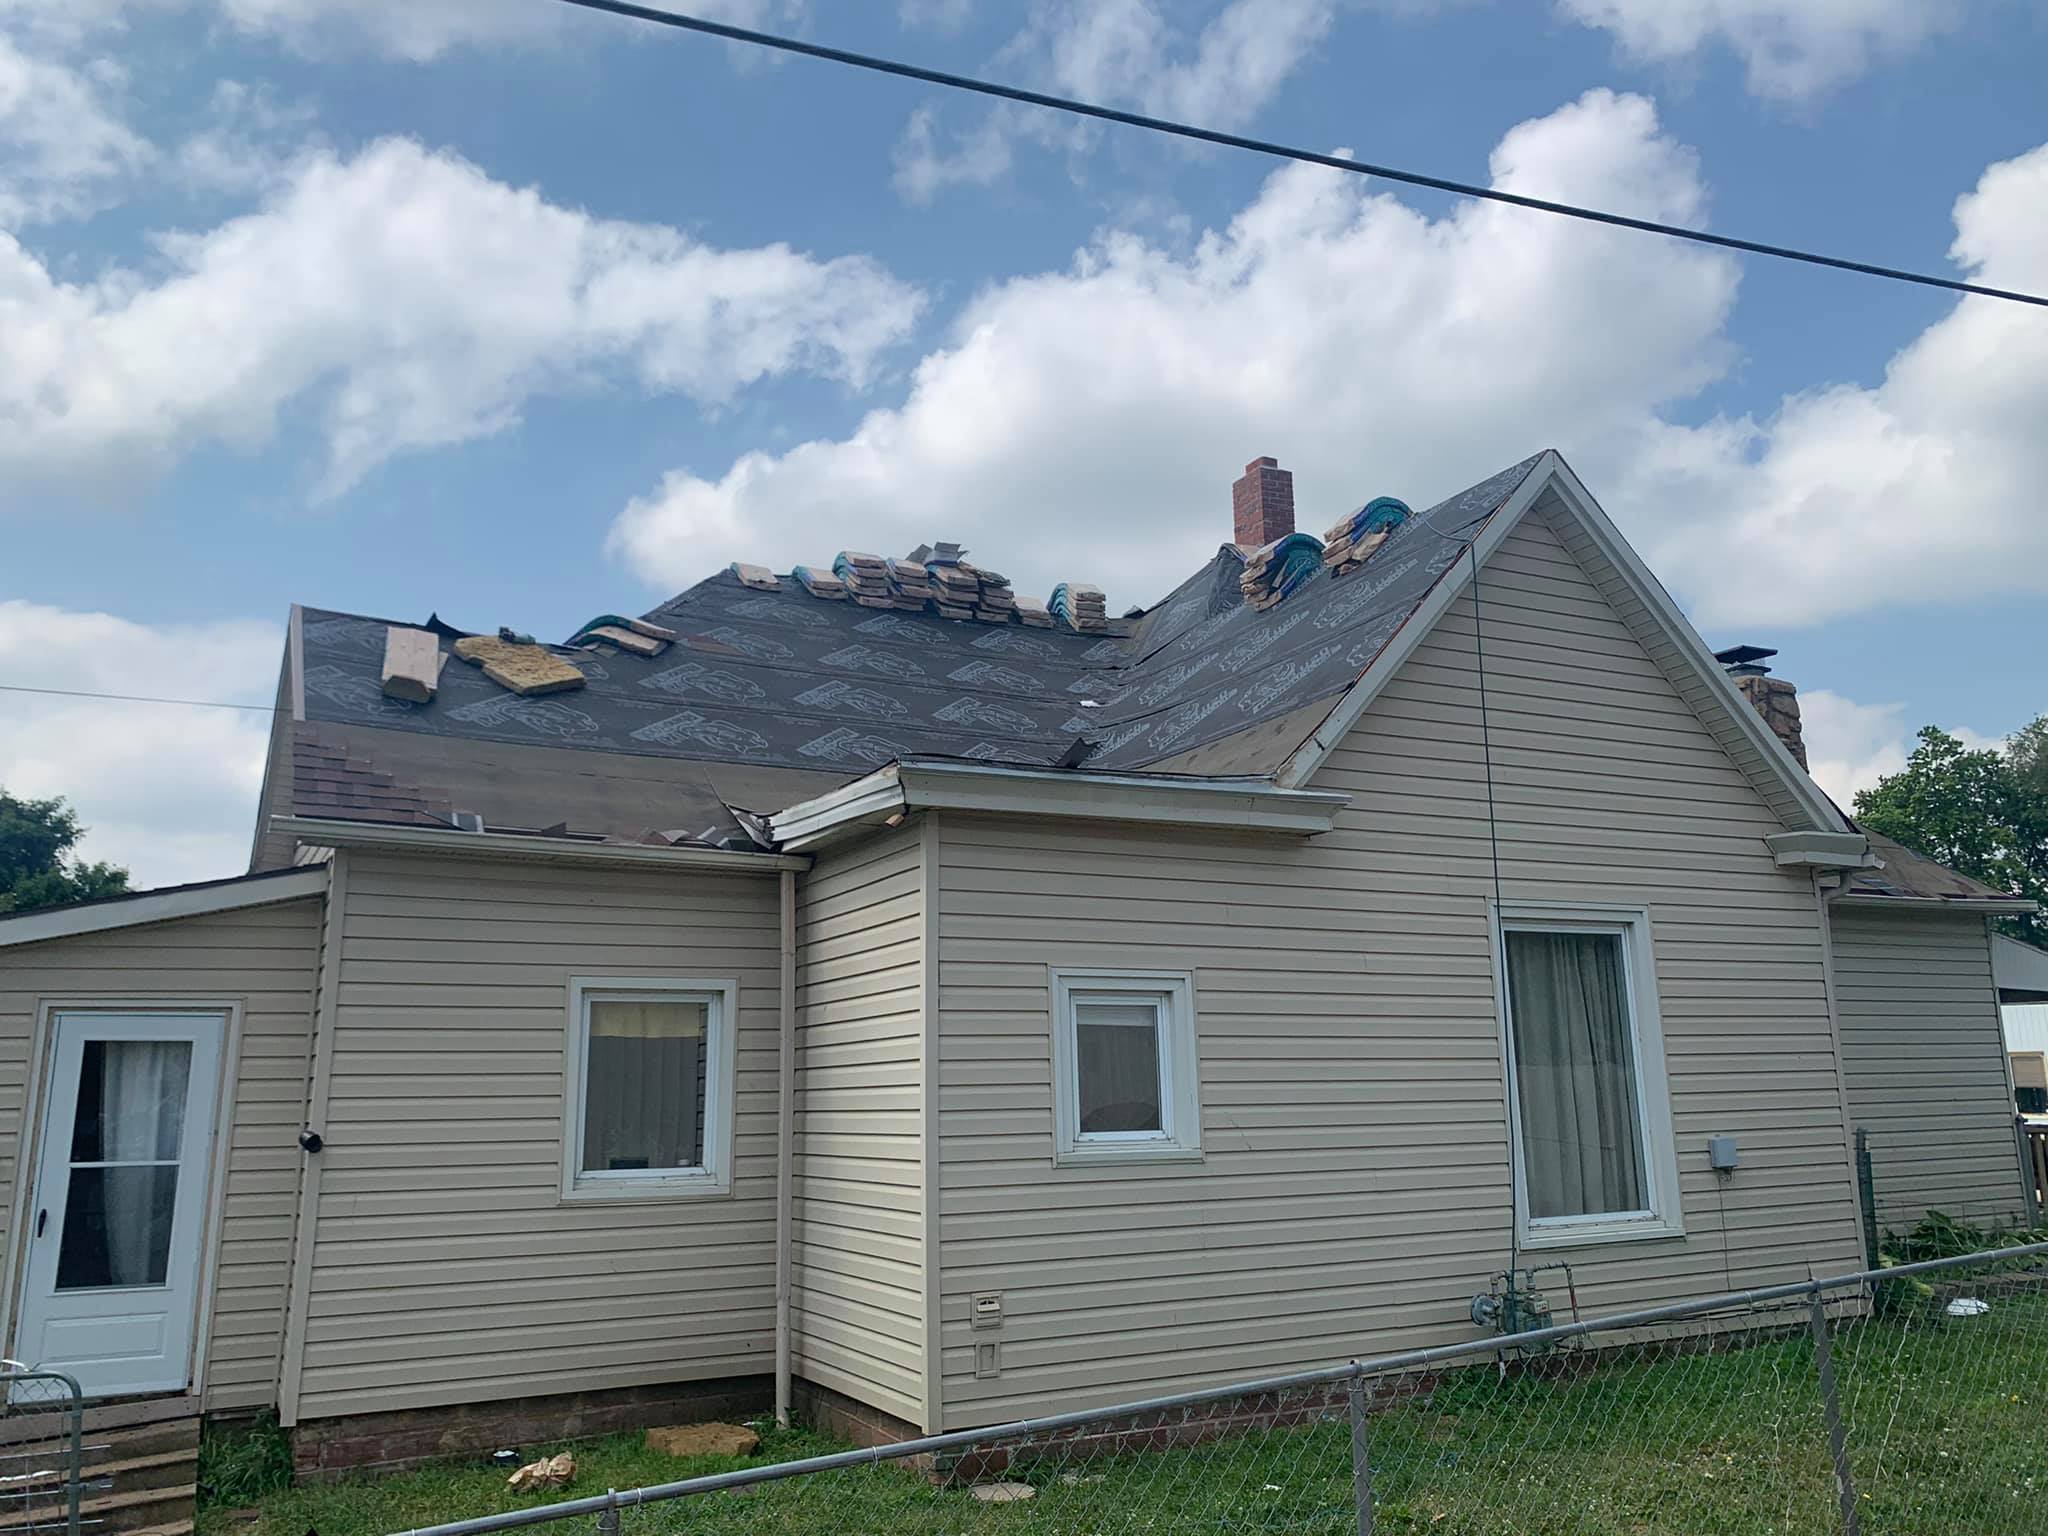 Roofing Companies Gladstone Missouri - 3 Essential Qualities In A